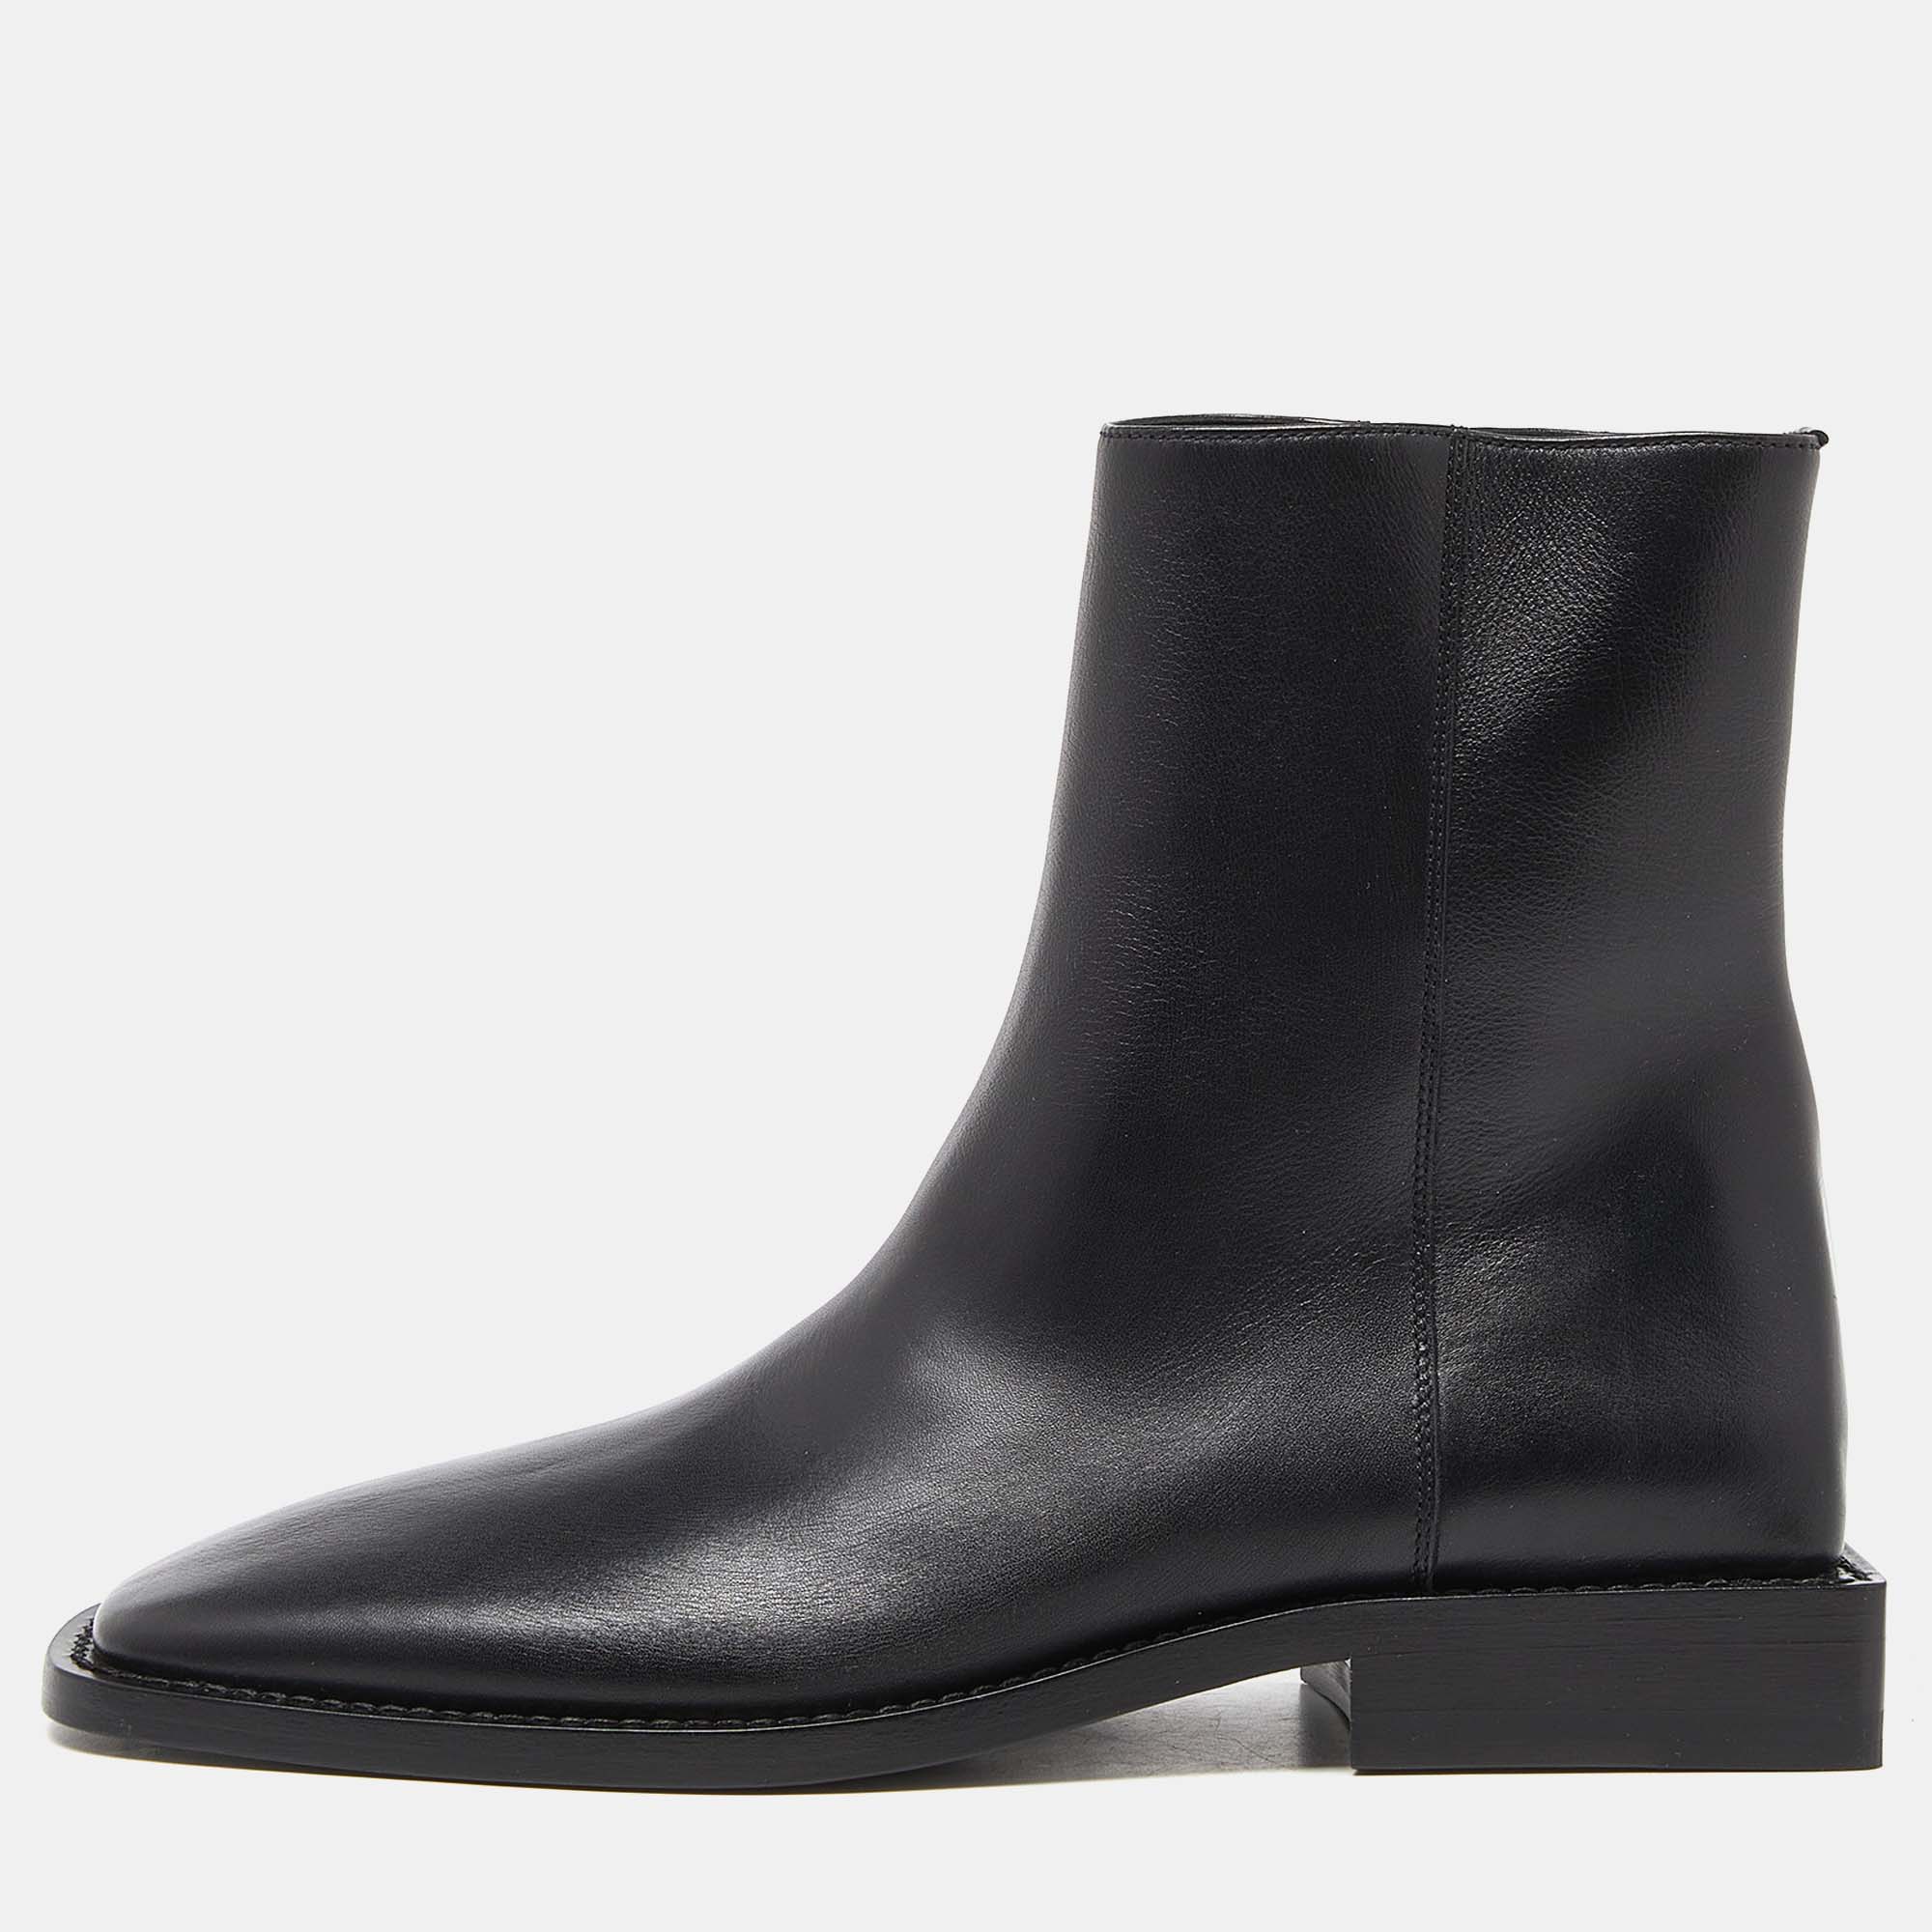 Pre-owned Balenciaga Black Leather Ankle Boots Size 38.5